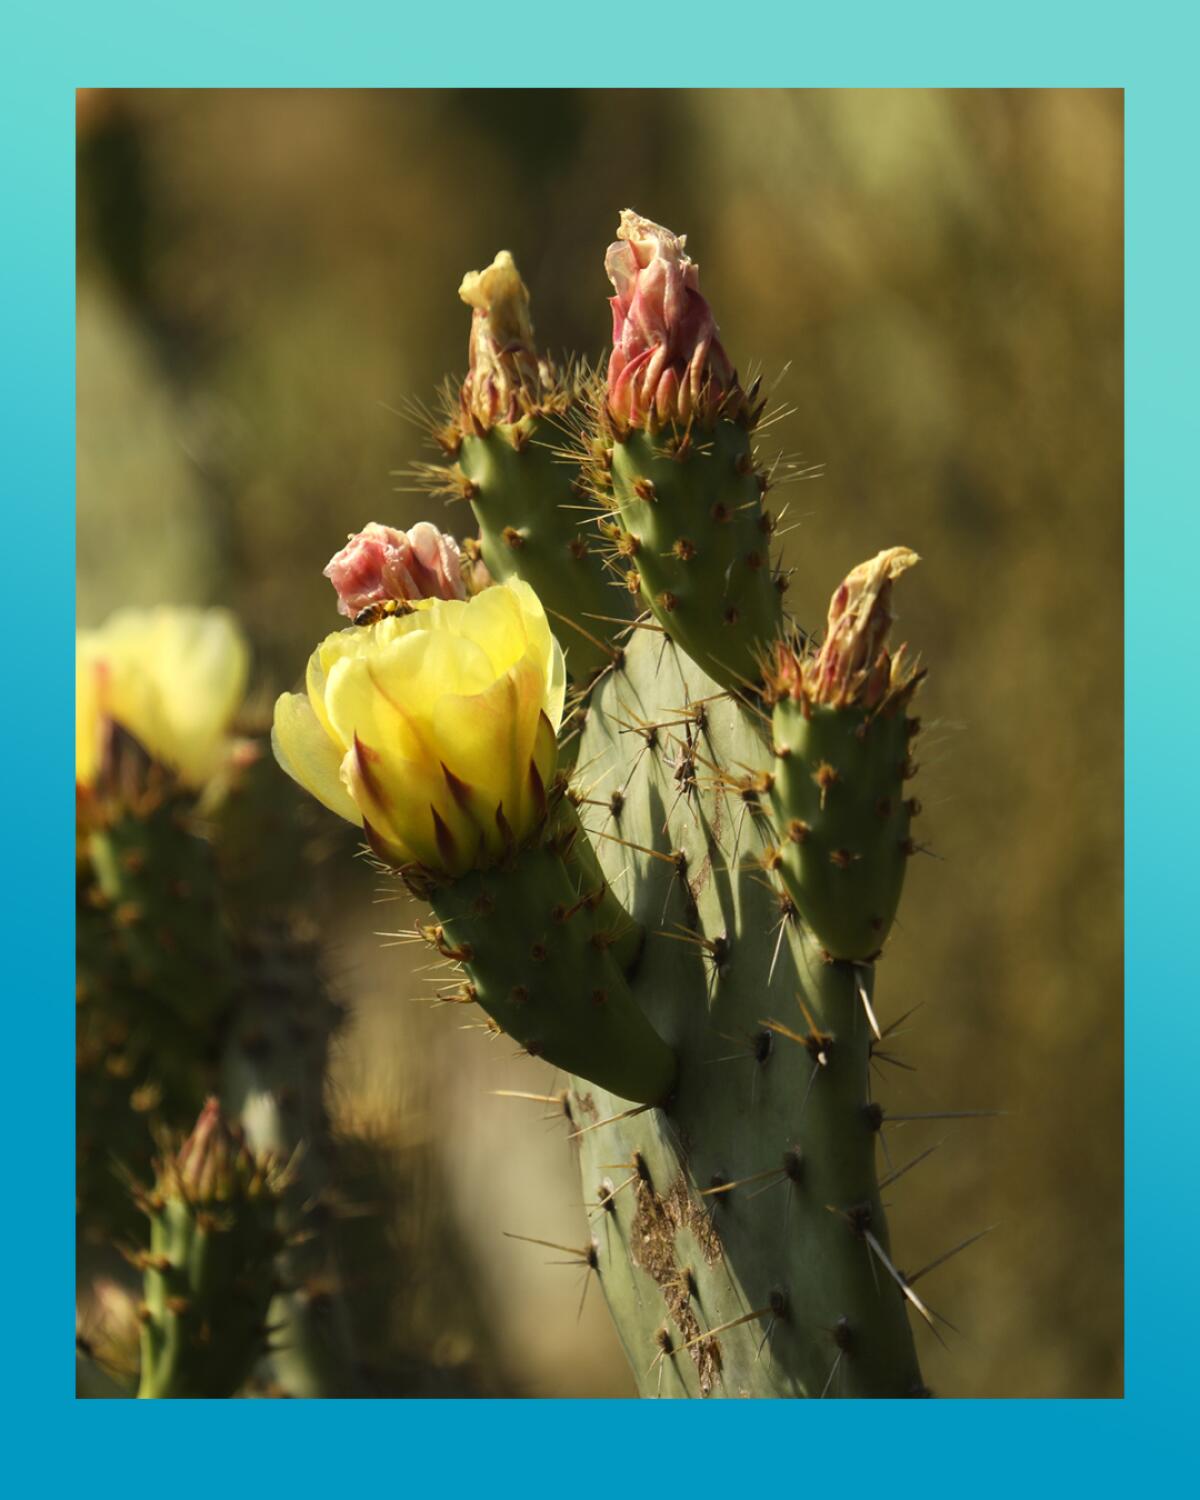 A photo of a prickly pear cactus in bloom at the former Banning Ranch oil field in Newport Beach.